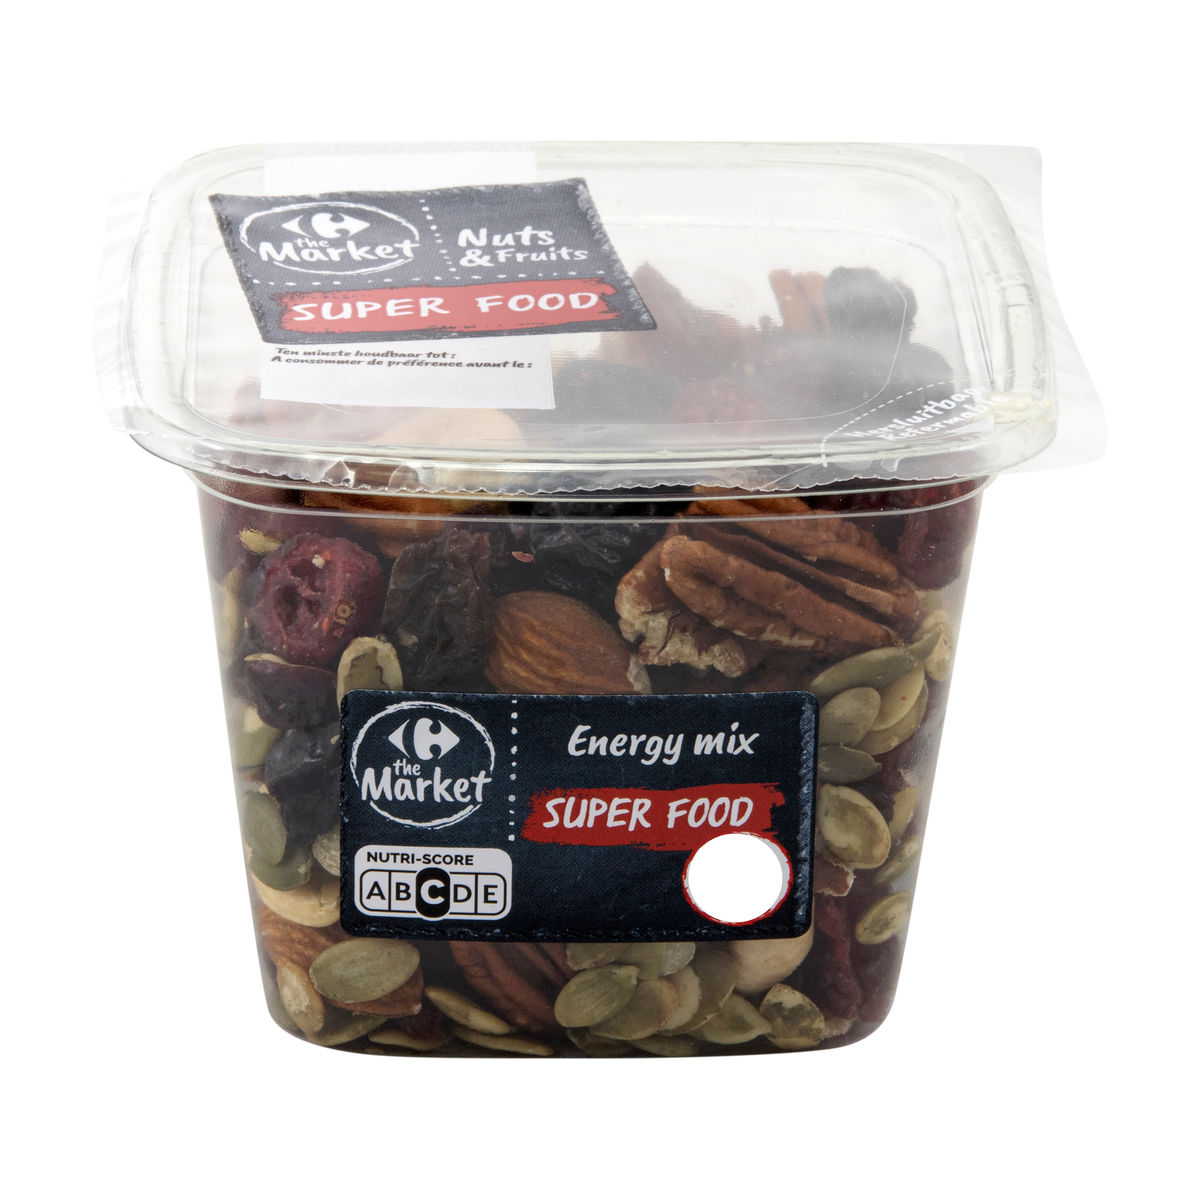 Carrefour The Market Baking Cuisine Nuts & Fruits Fun Mix 160 g